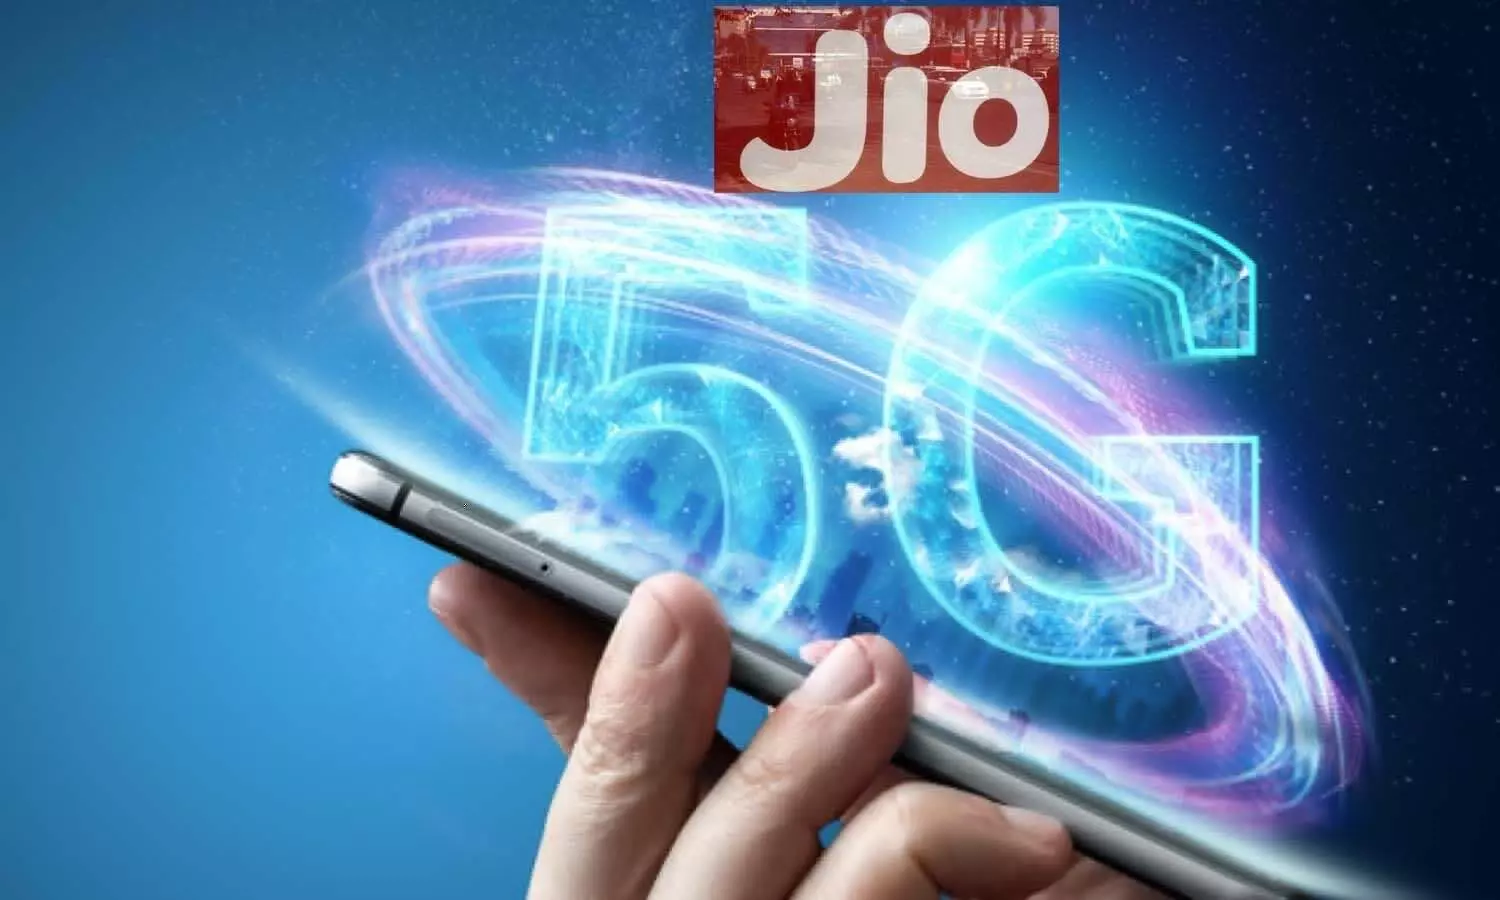 Jio showed power in 5G spectrum purchase, became king by bidding Rs 88,078 crore